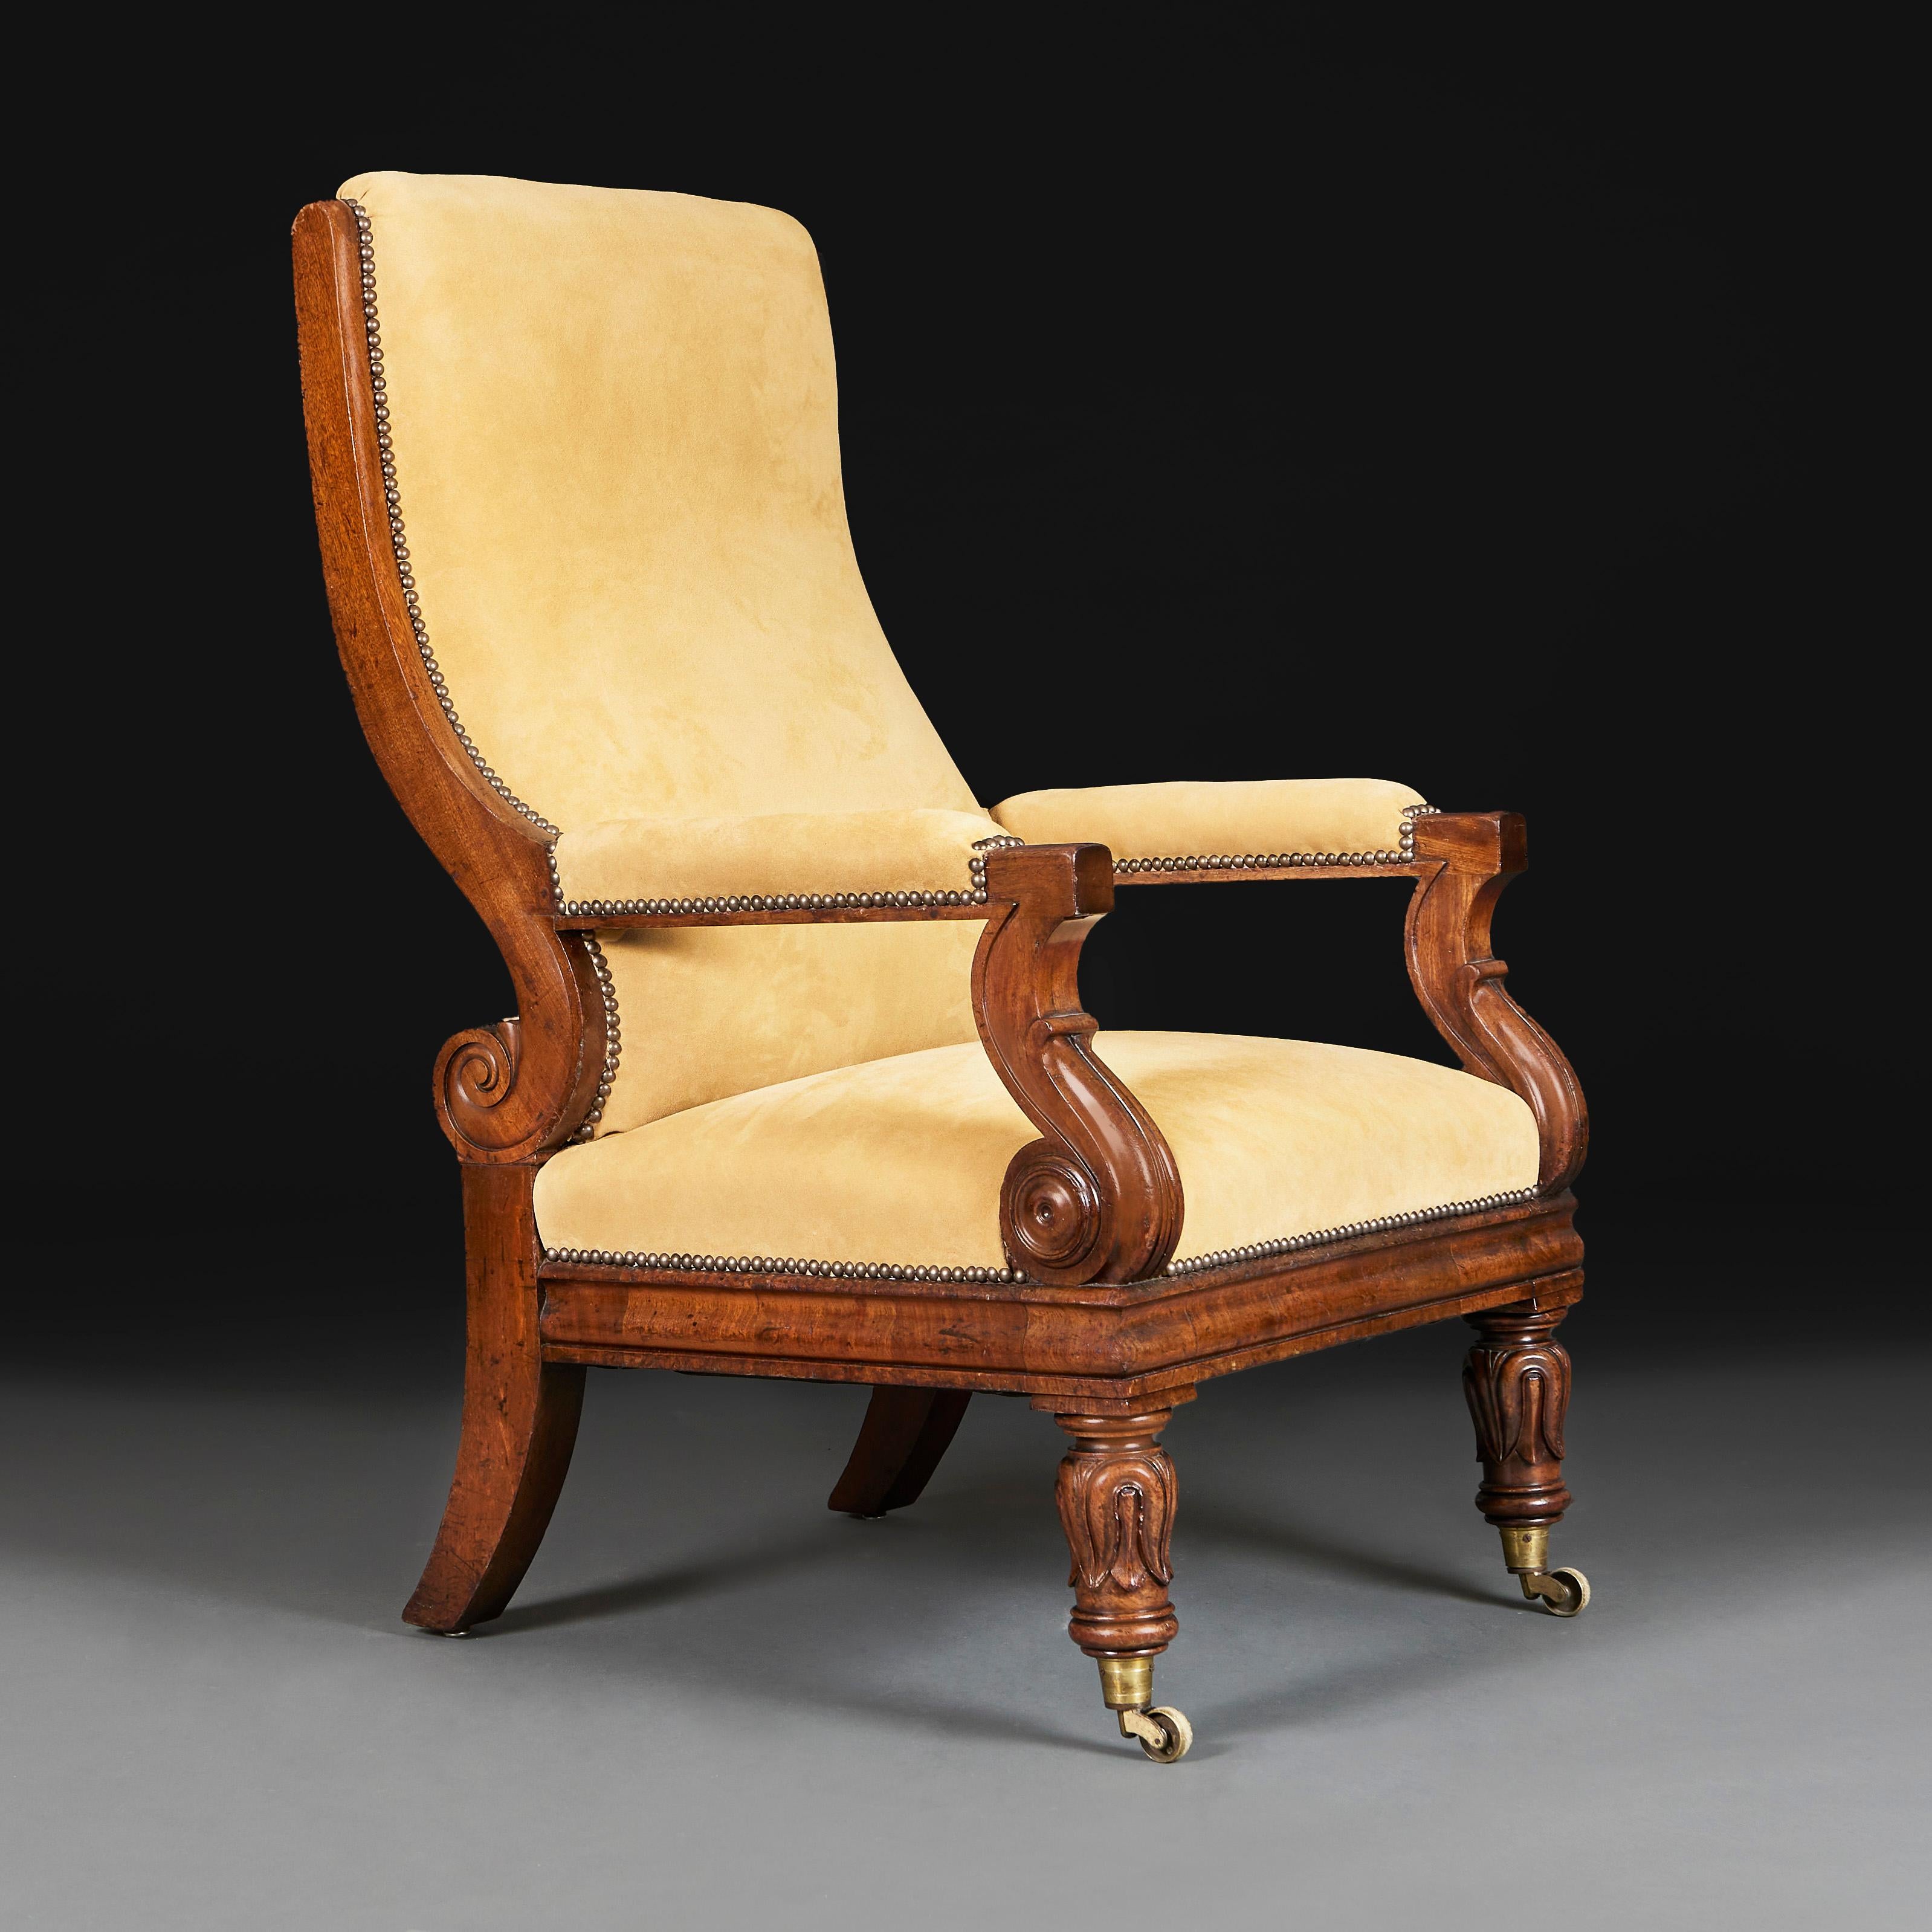 England, circa 1840

A William IV mahogany library chair of large scale, with scrolling arms and uprights, the front legs carved with tulip motives and terminating in brass castors.

Height 114.00cm
Width 64.00cm
Depth 79.00cm
Seat height 40.00cm